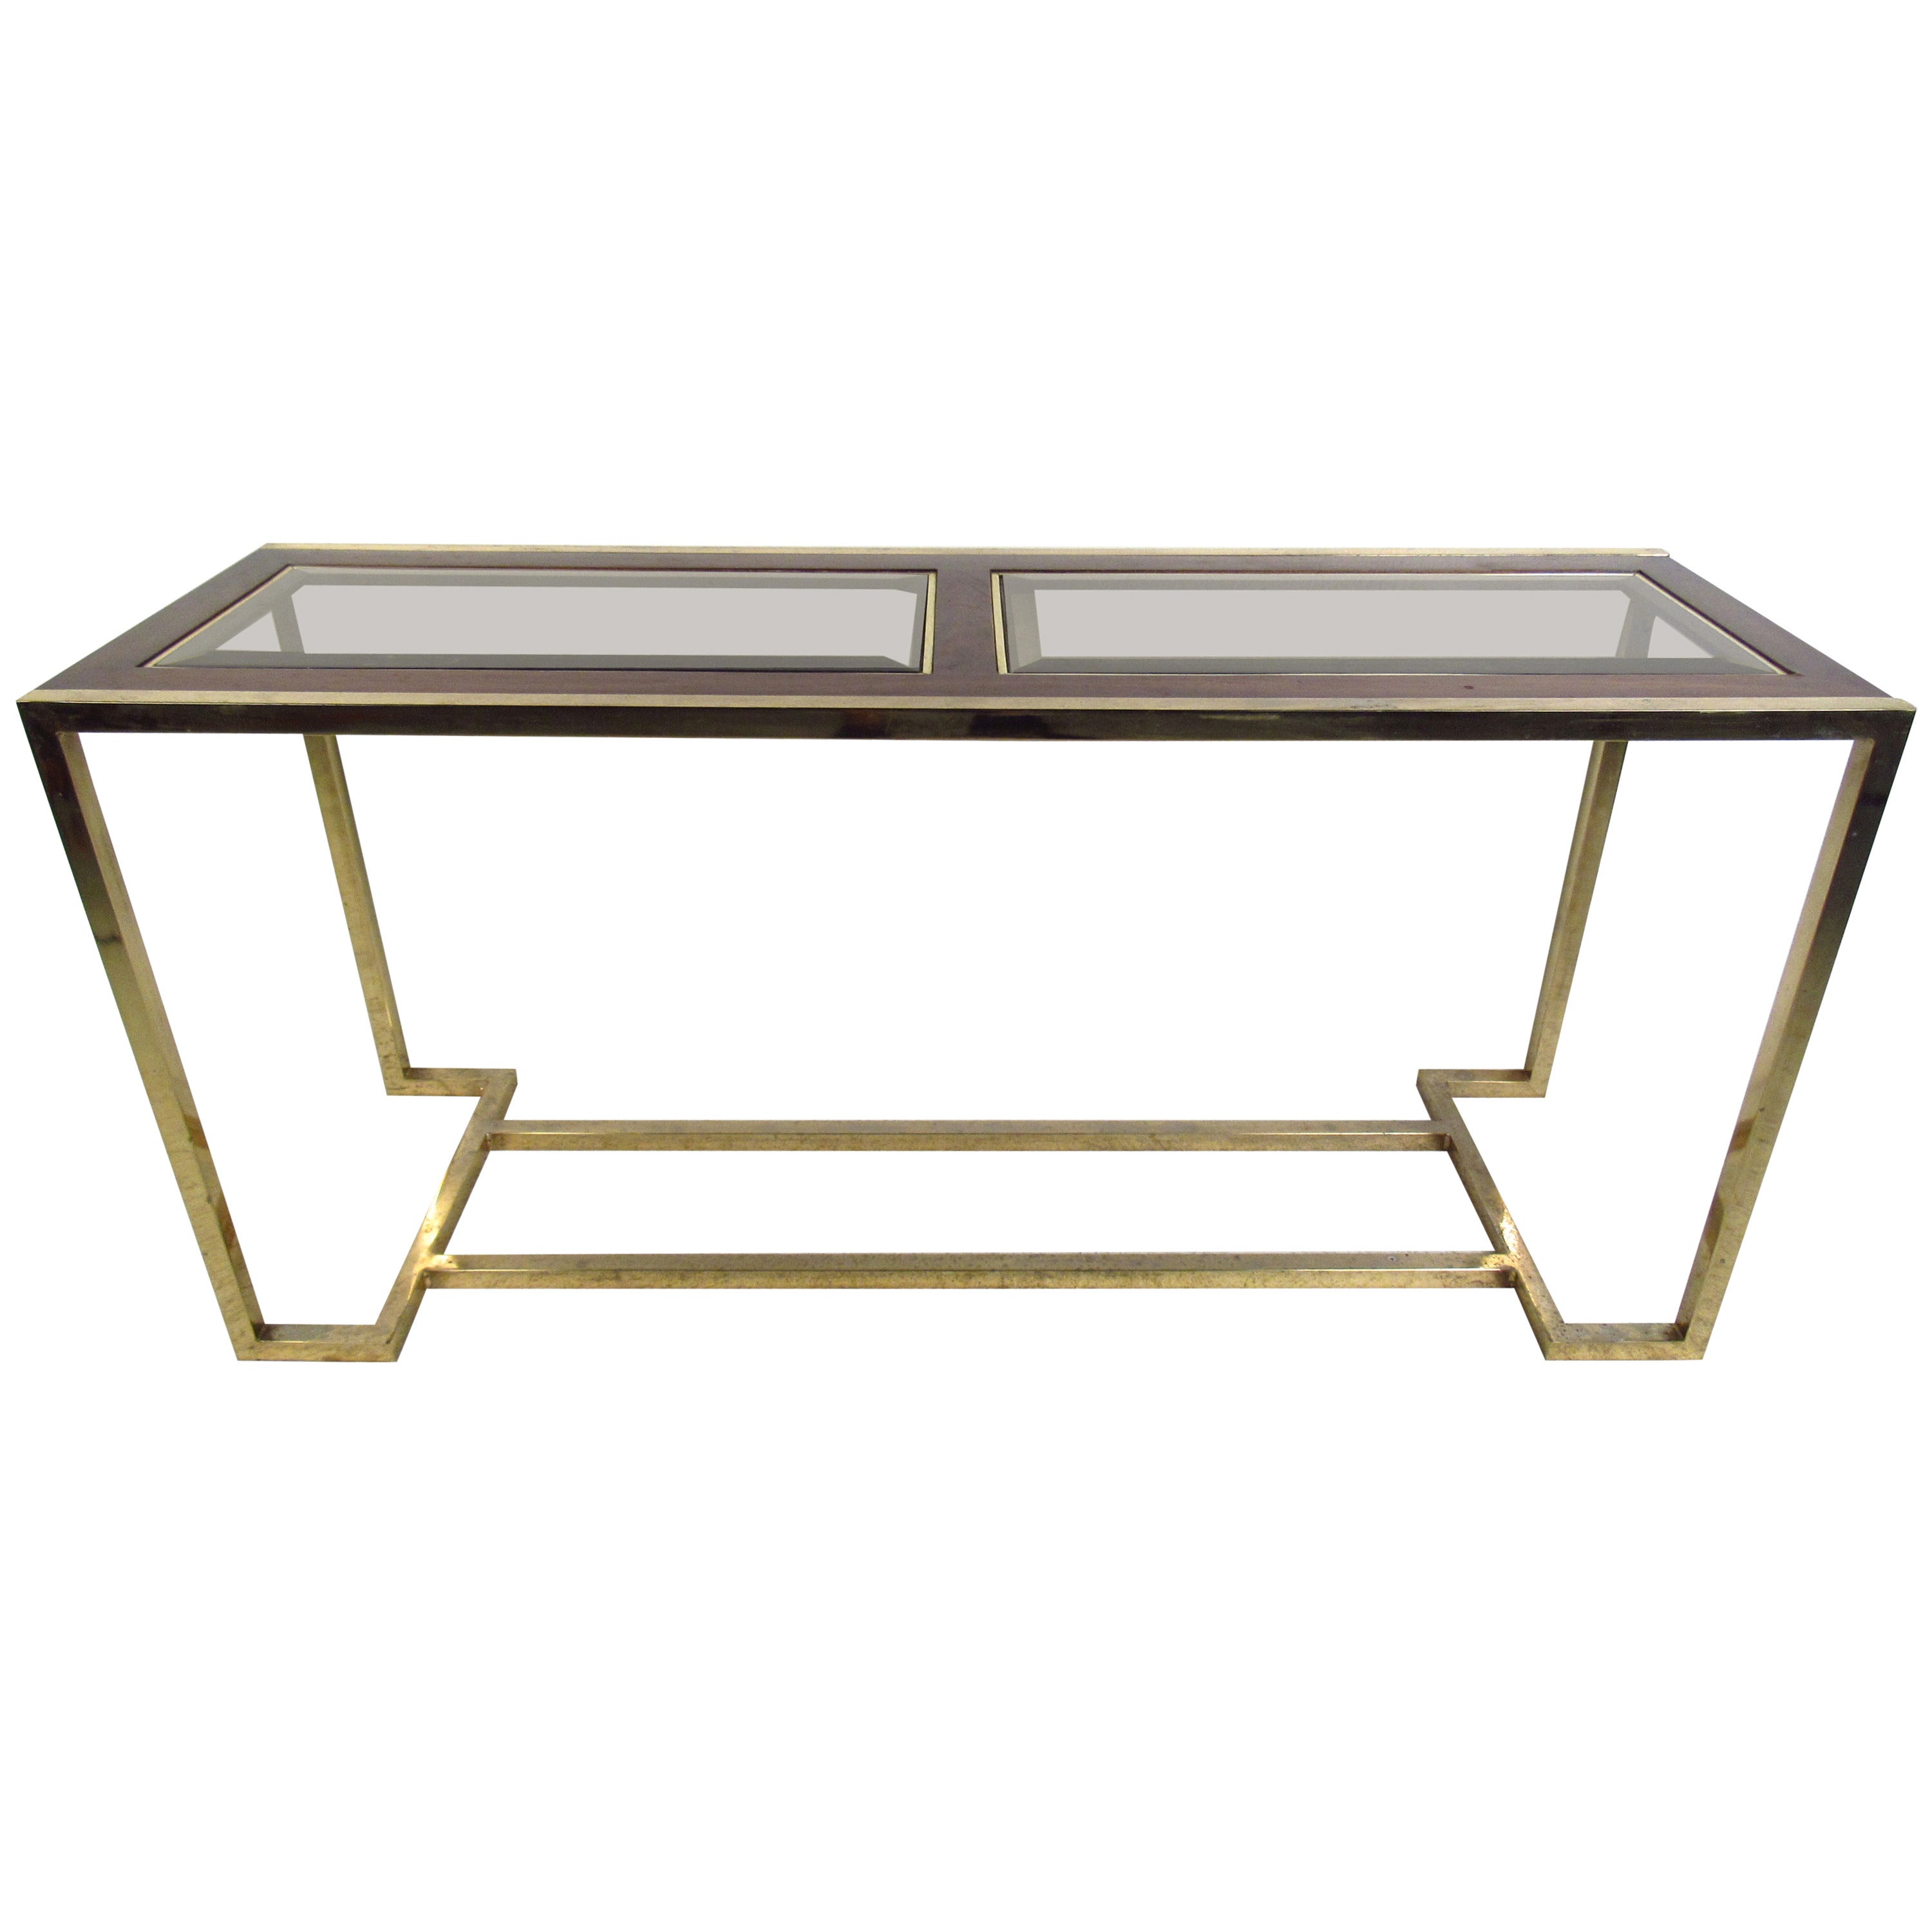 This midcentury console table features a walnut in lay with beveled glass atop a brass base which offers an elegant, modern flare to any home or office.

Please confirm item location (NY or NJ) with dealer.